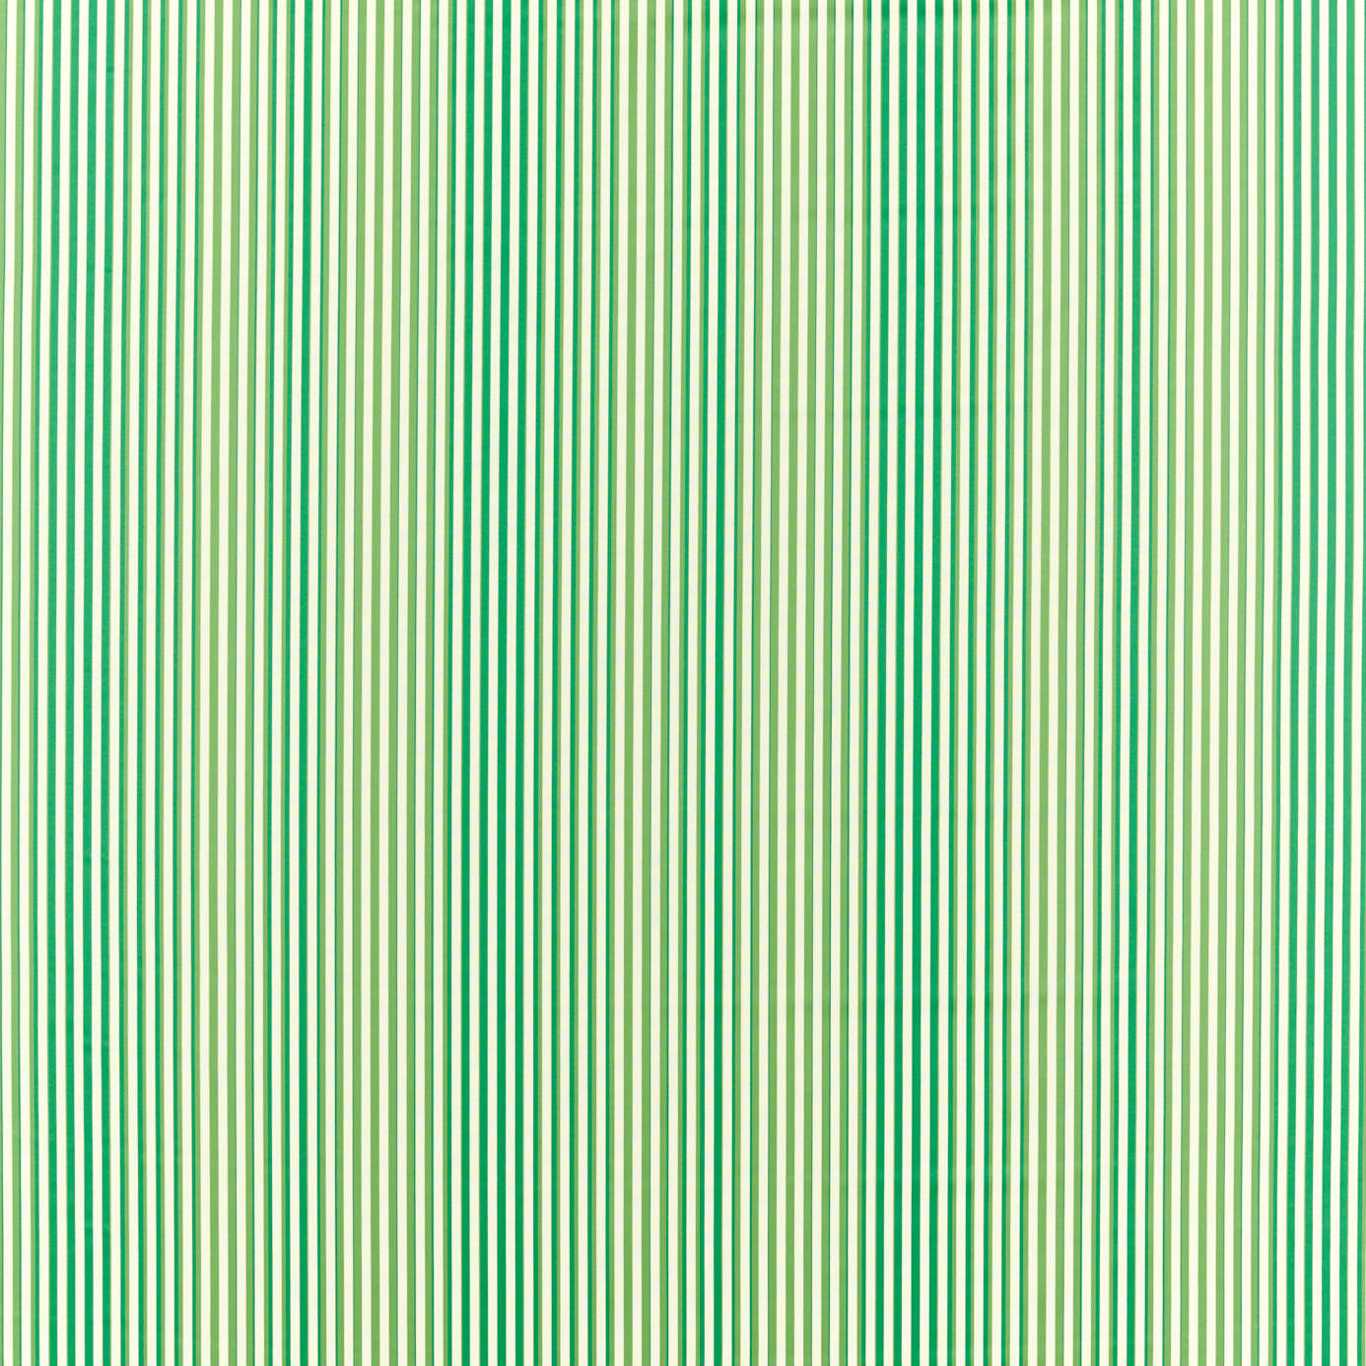 Calla Fabric by Harlequin - HQN2133881 - Emerald/First Light